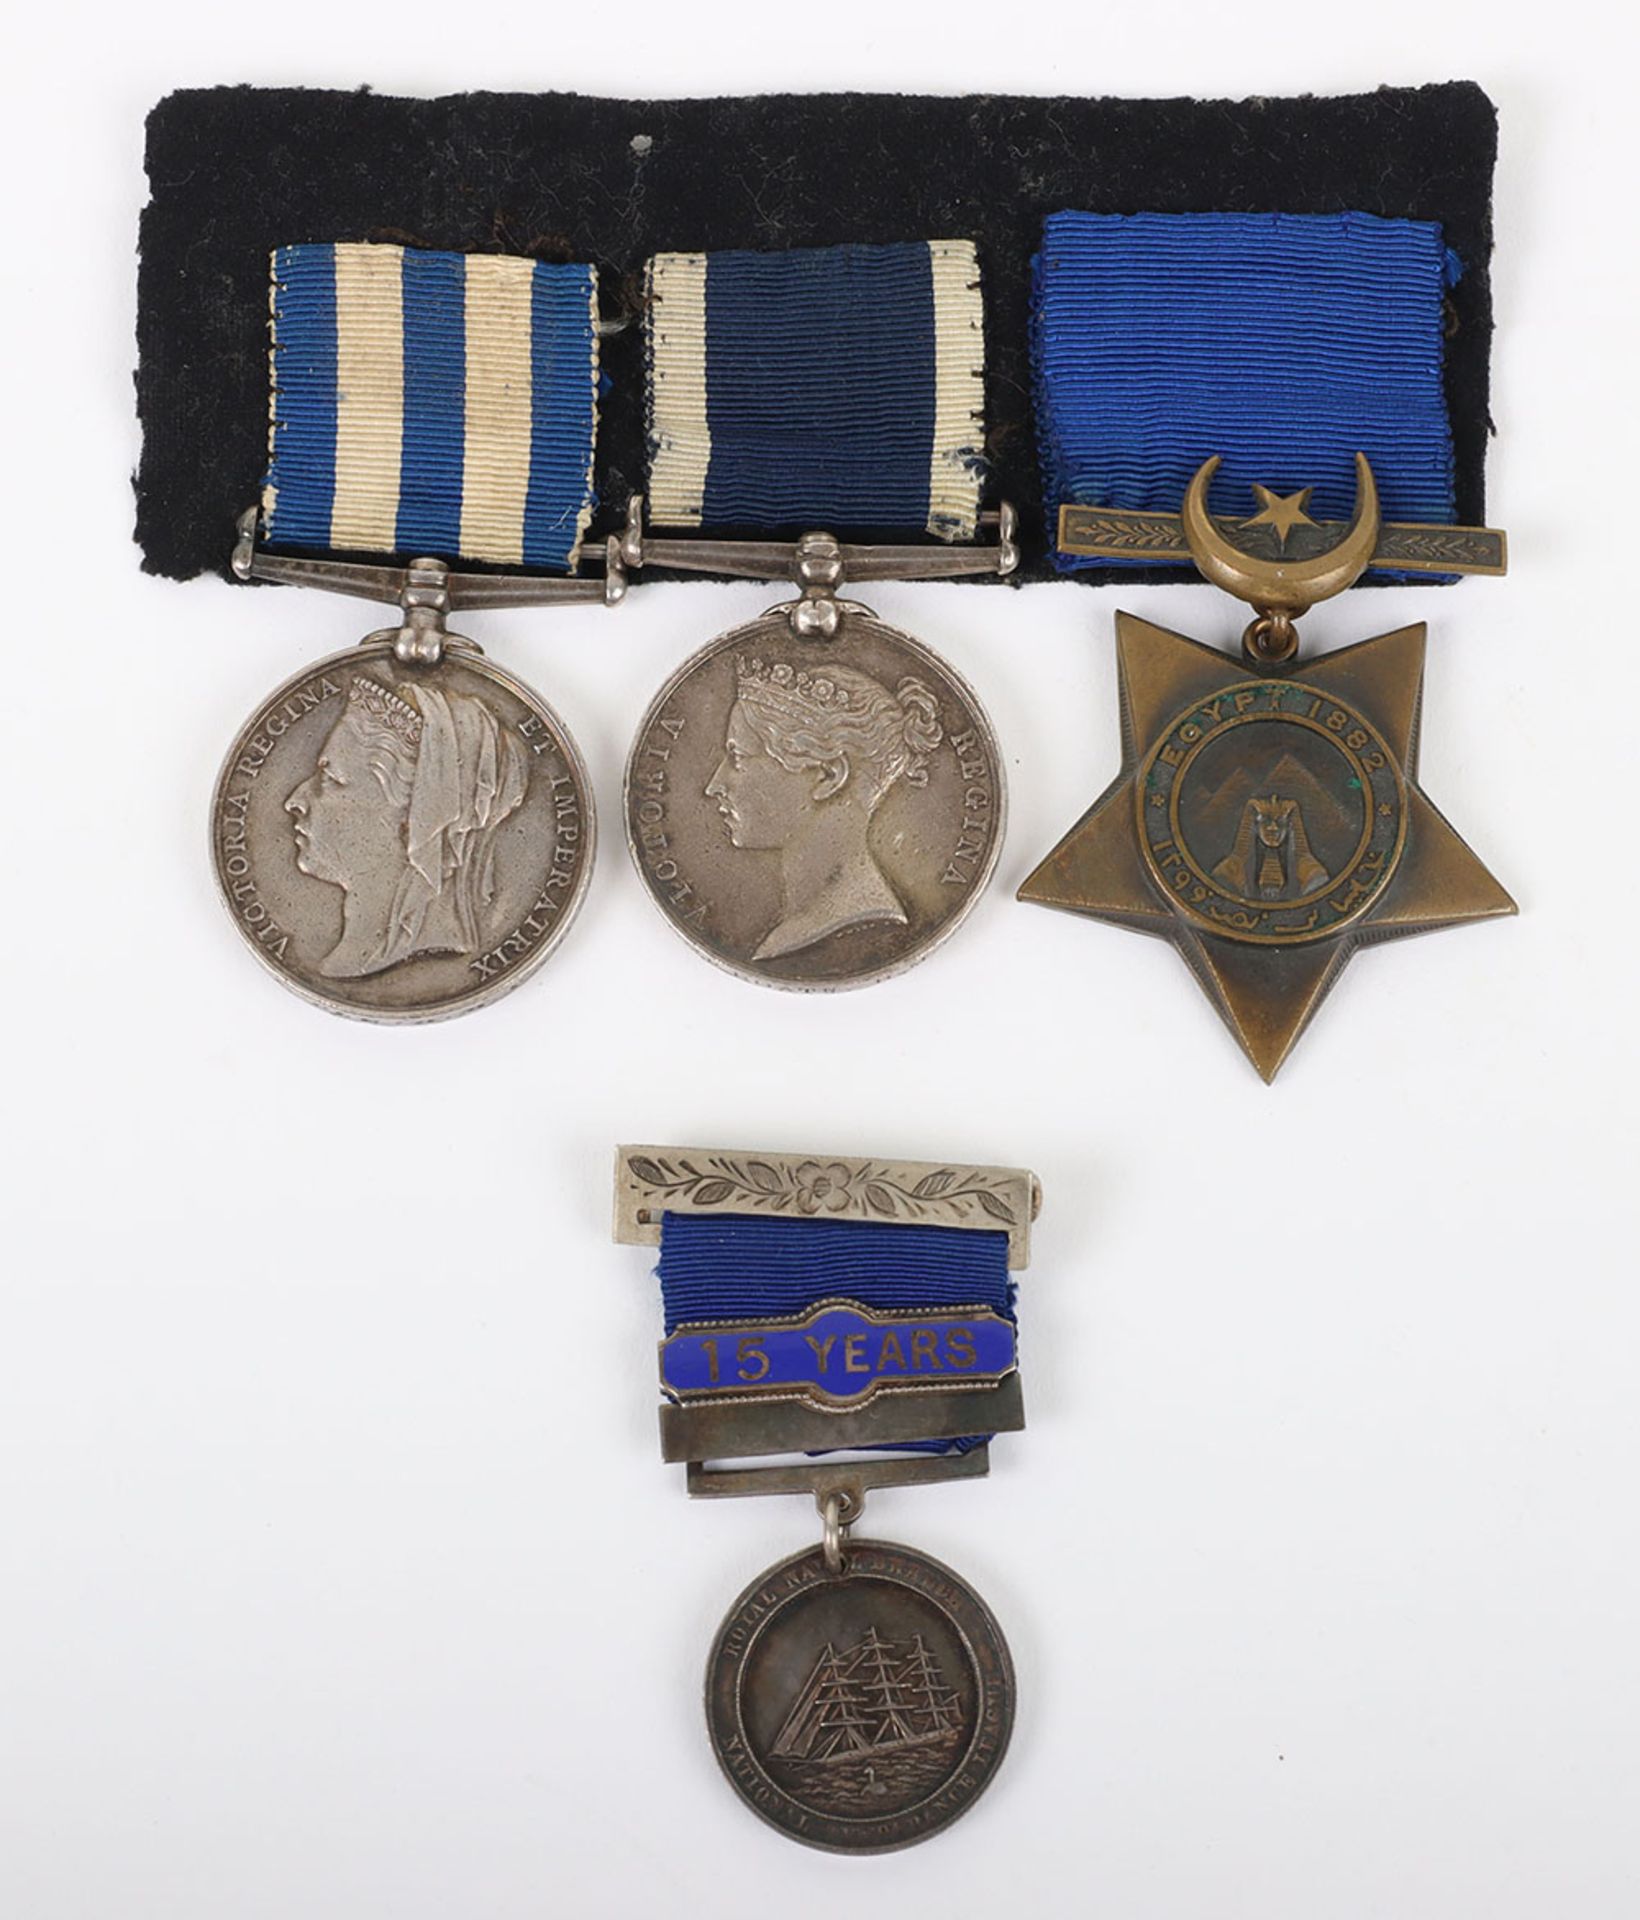 Royal Navy Long Service Medal Group of Three for Service in the 1882 Egypt Campaign